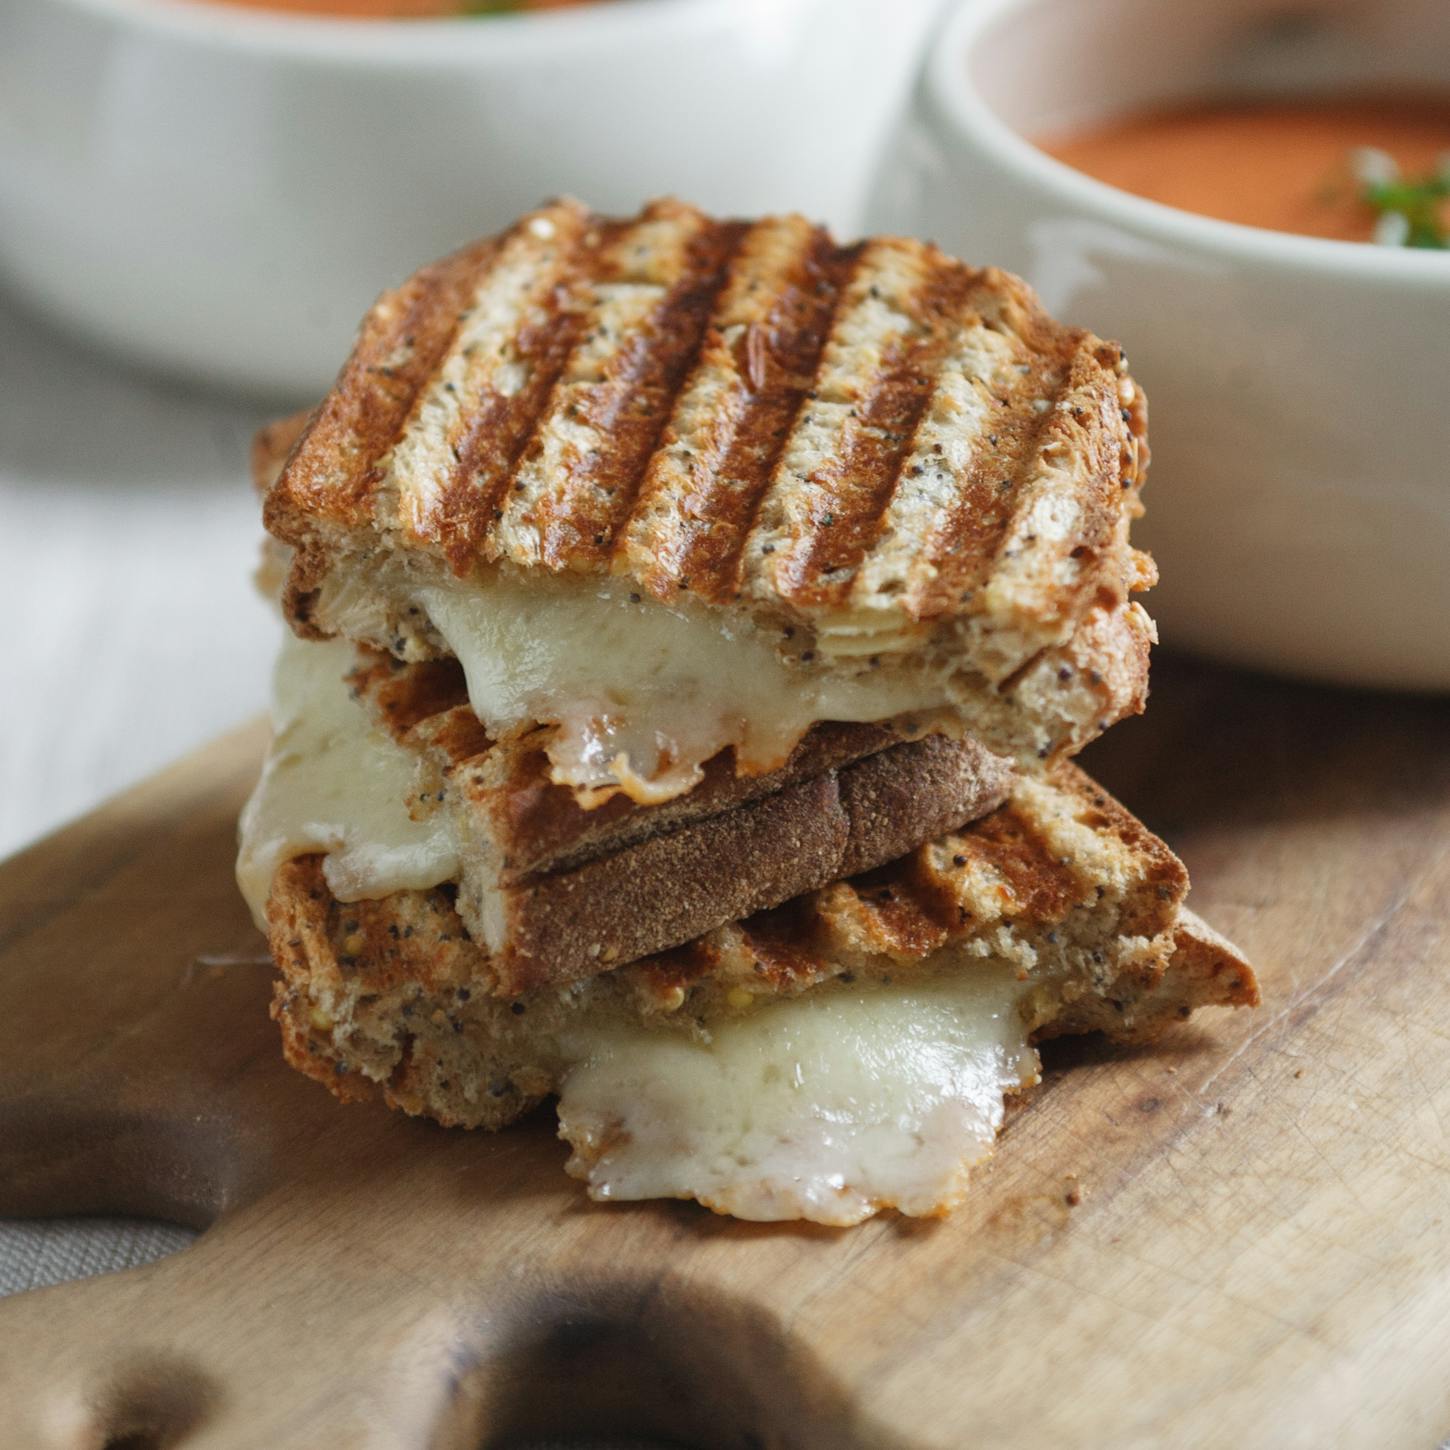 https://images.theyellowtable.com/best-grilled-cheese-sandwiches-recipe-sq.jpg?w=1450&q=45